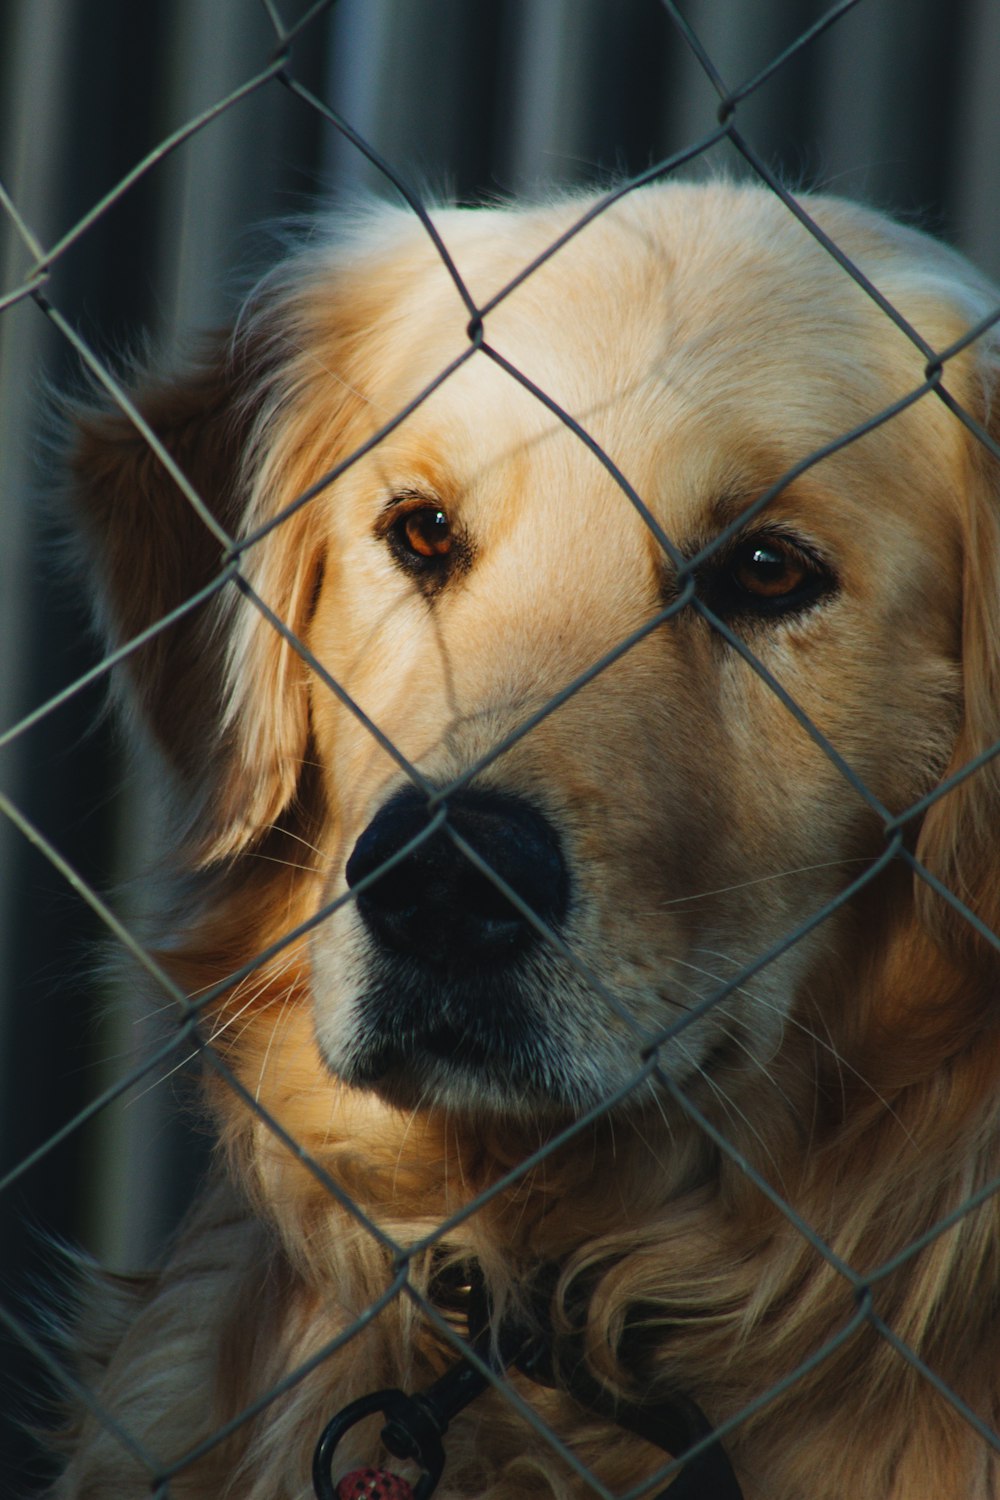 a close up of a dog behind a fence